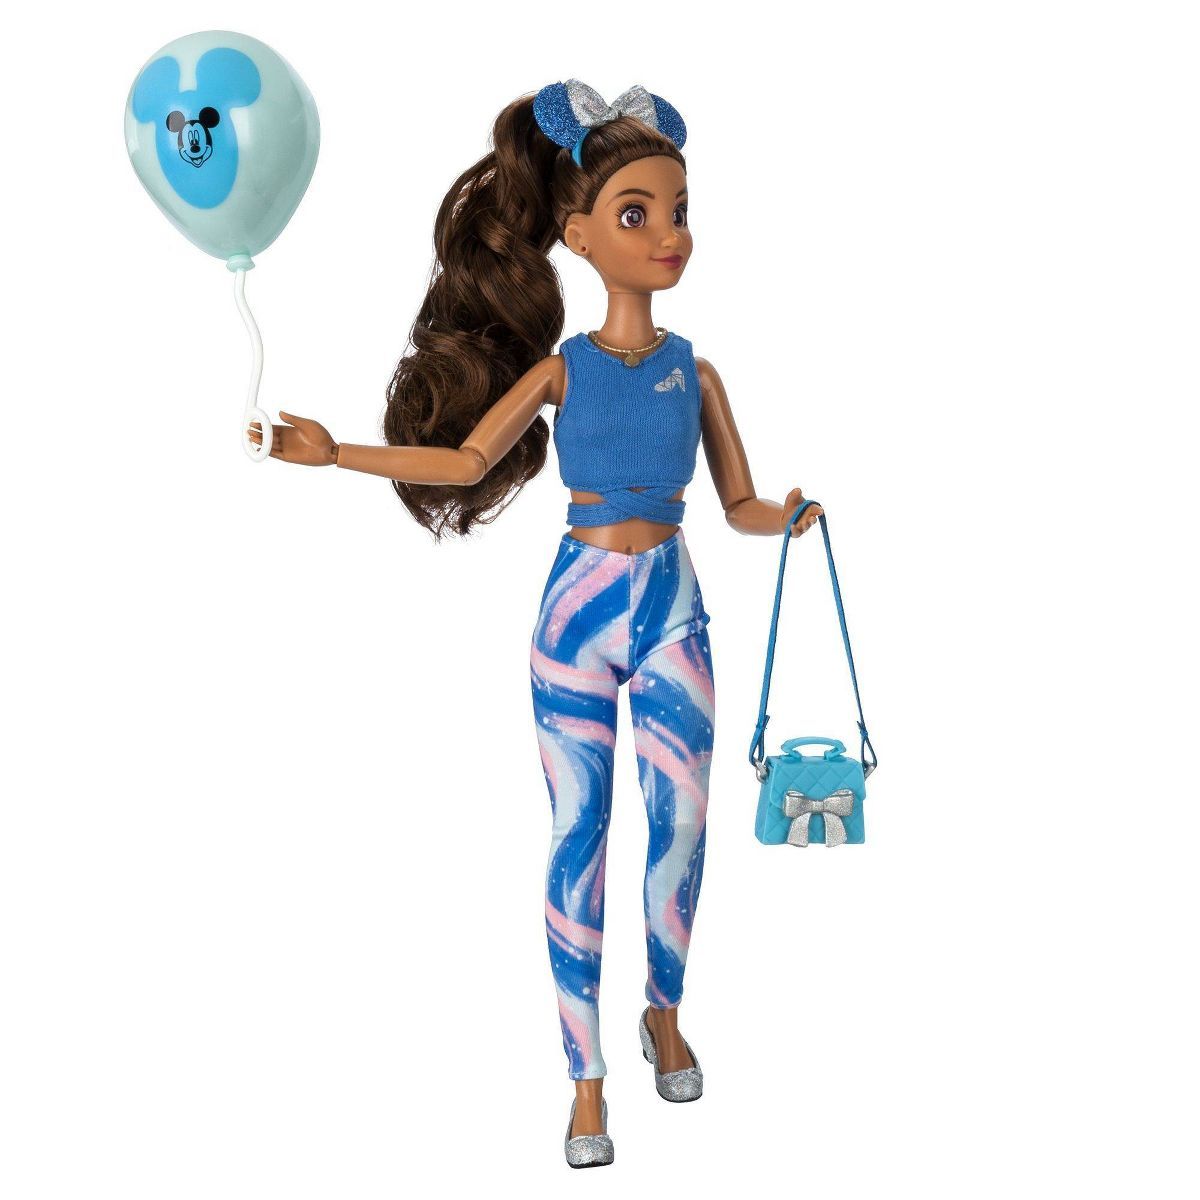 Disney ily 4EVER Inspired by Cinderella Fashion Doll | Target